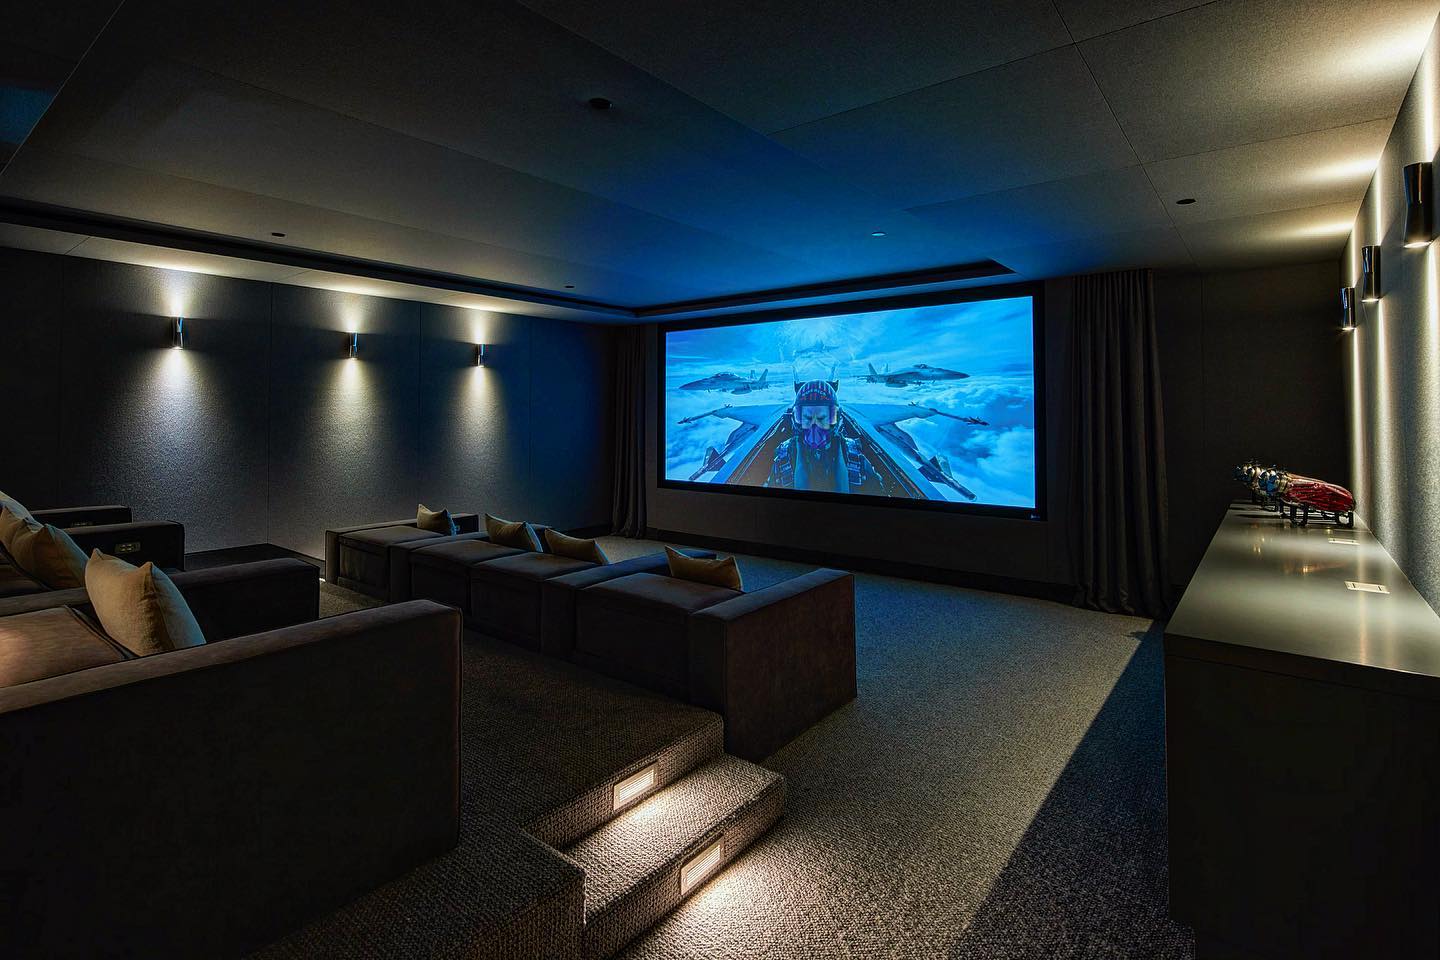 Acoustically, engineered and completely soundproof, this room floats. A proper media room that doesn’t touch the actual structure is the only way to go. Perforated screen laser projector and 32 pairs of speakers. This just might blow your skirt up. #scottgillendesign #private #guardgatedcommunity #thecase #midcenturymodern #estates